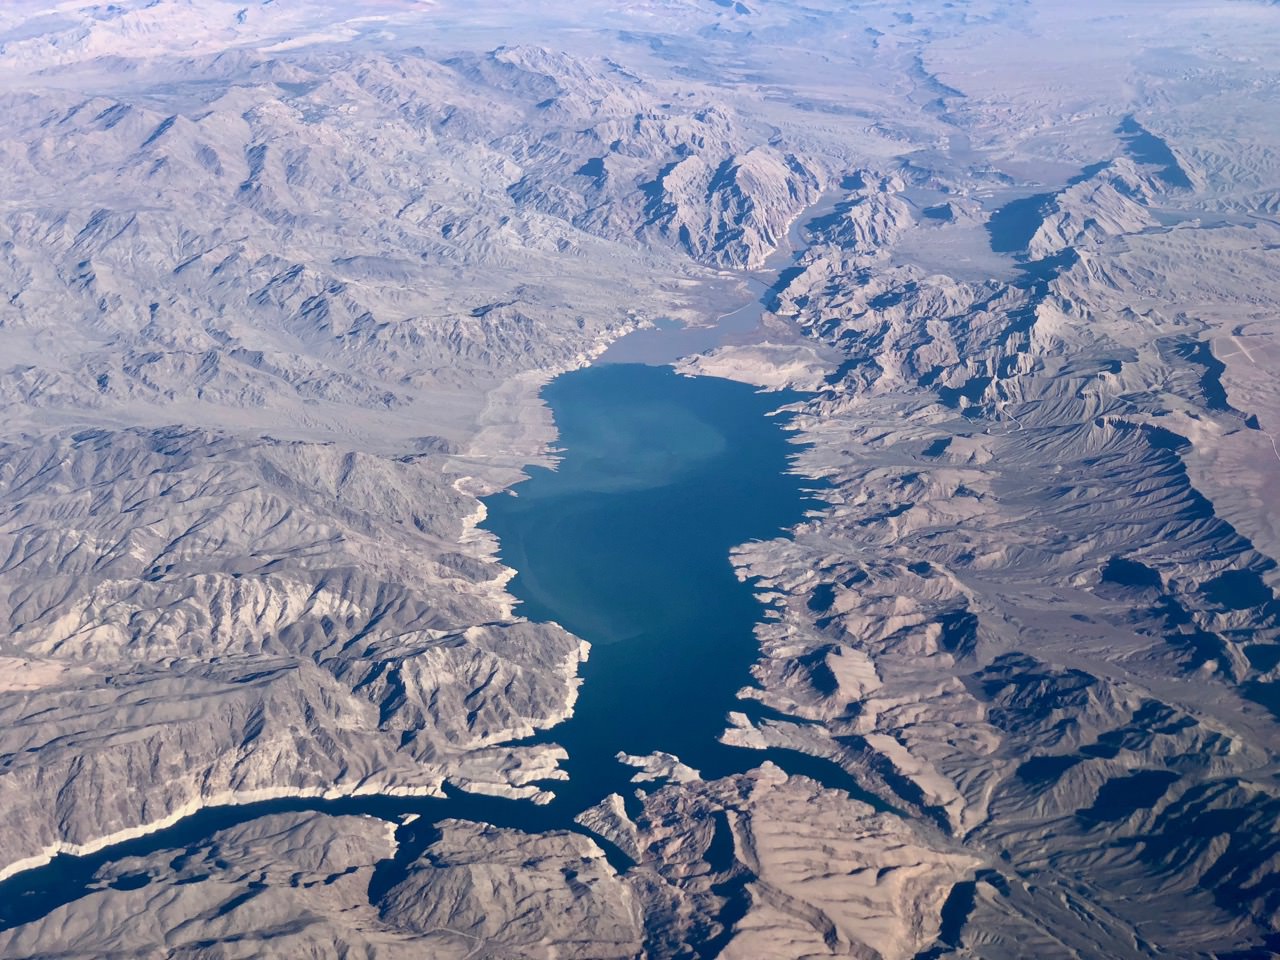 Lake Mead and the Colorado River